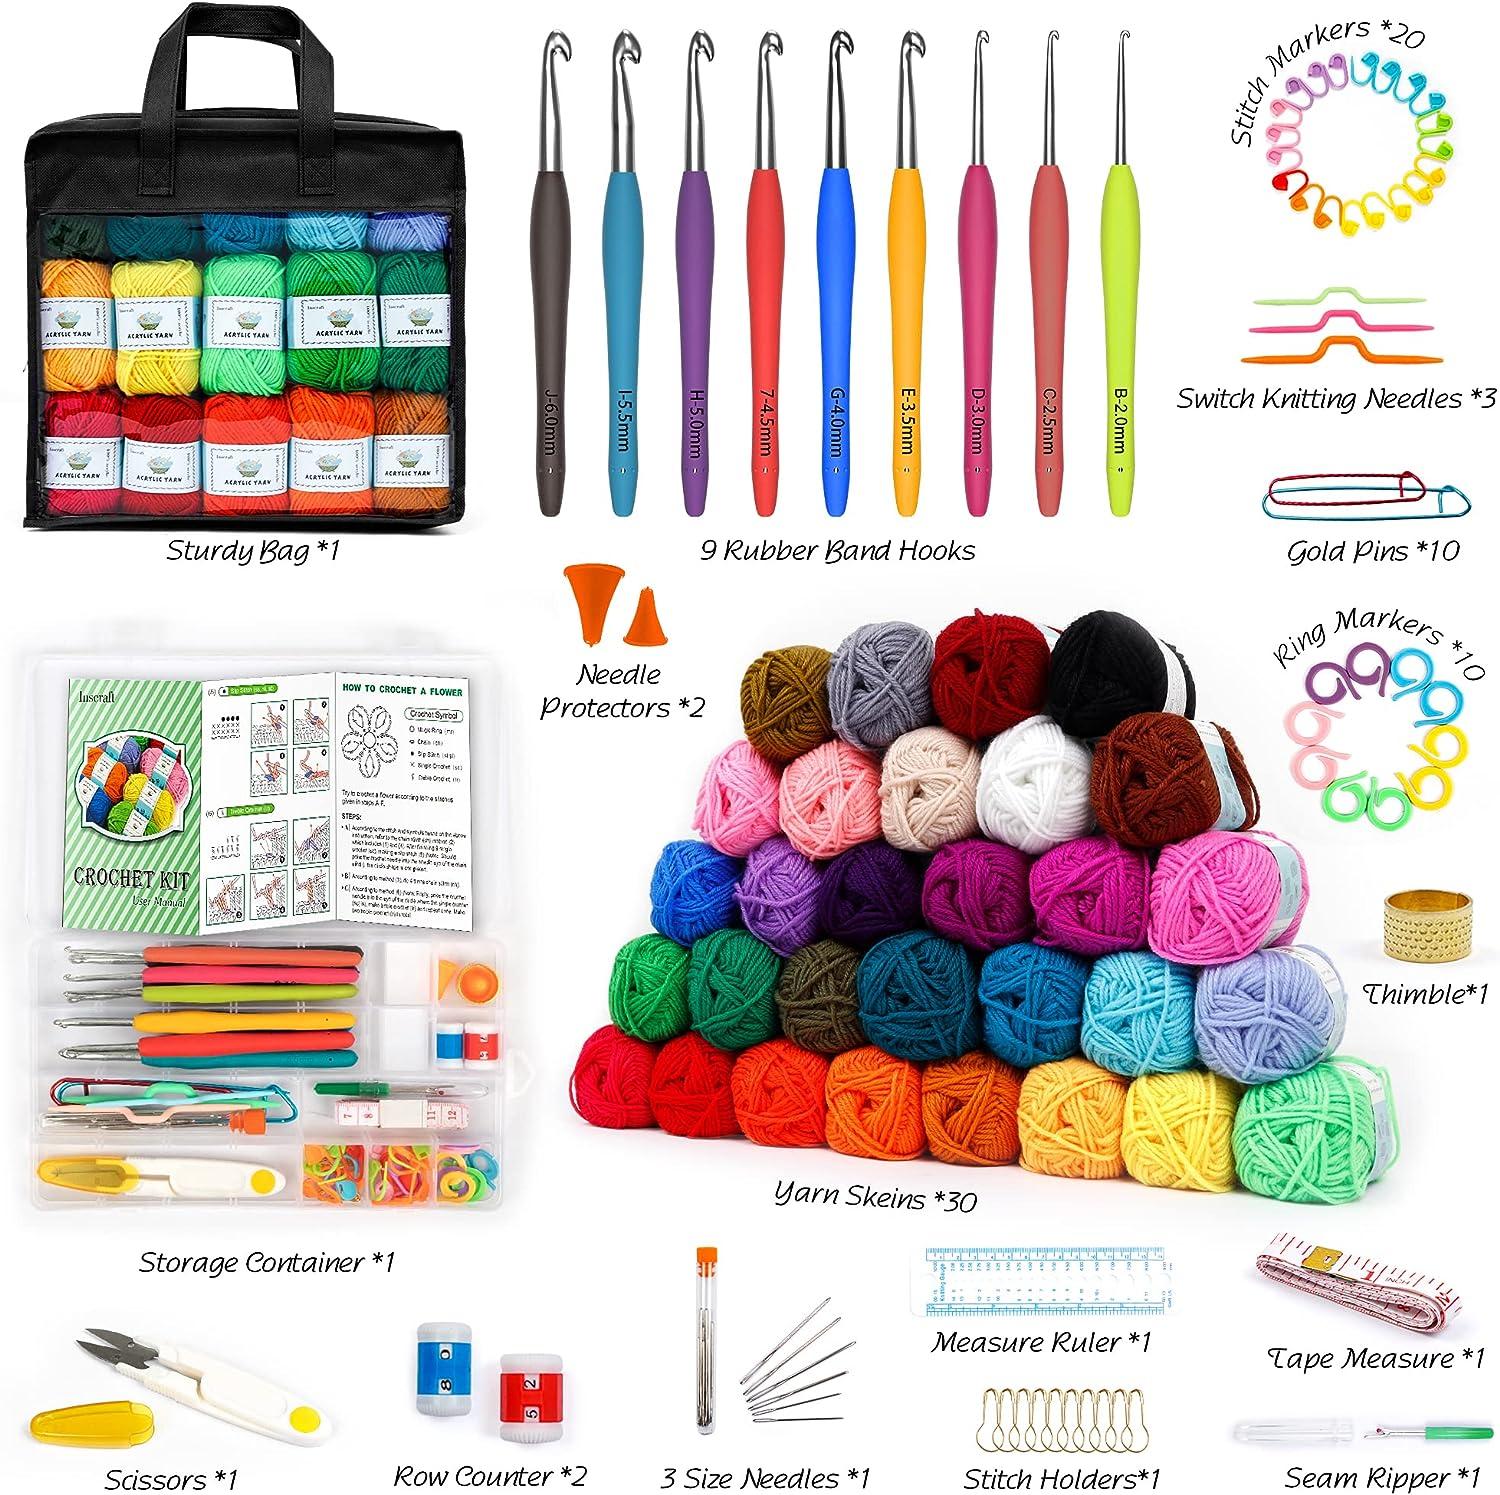  Aeelike Crochet Kit with Yarn for Beginner Adult, All in One  Starter Set Includes 1093 Yards 20pcs Acrylic Yarn Skeins Balls, 23pcs  Crochet Hooks,Crocheting Instruction and White Tote Storage Bag